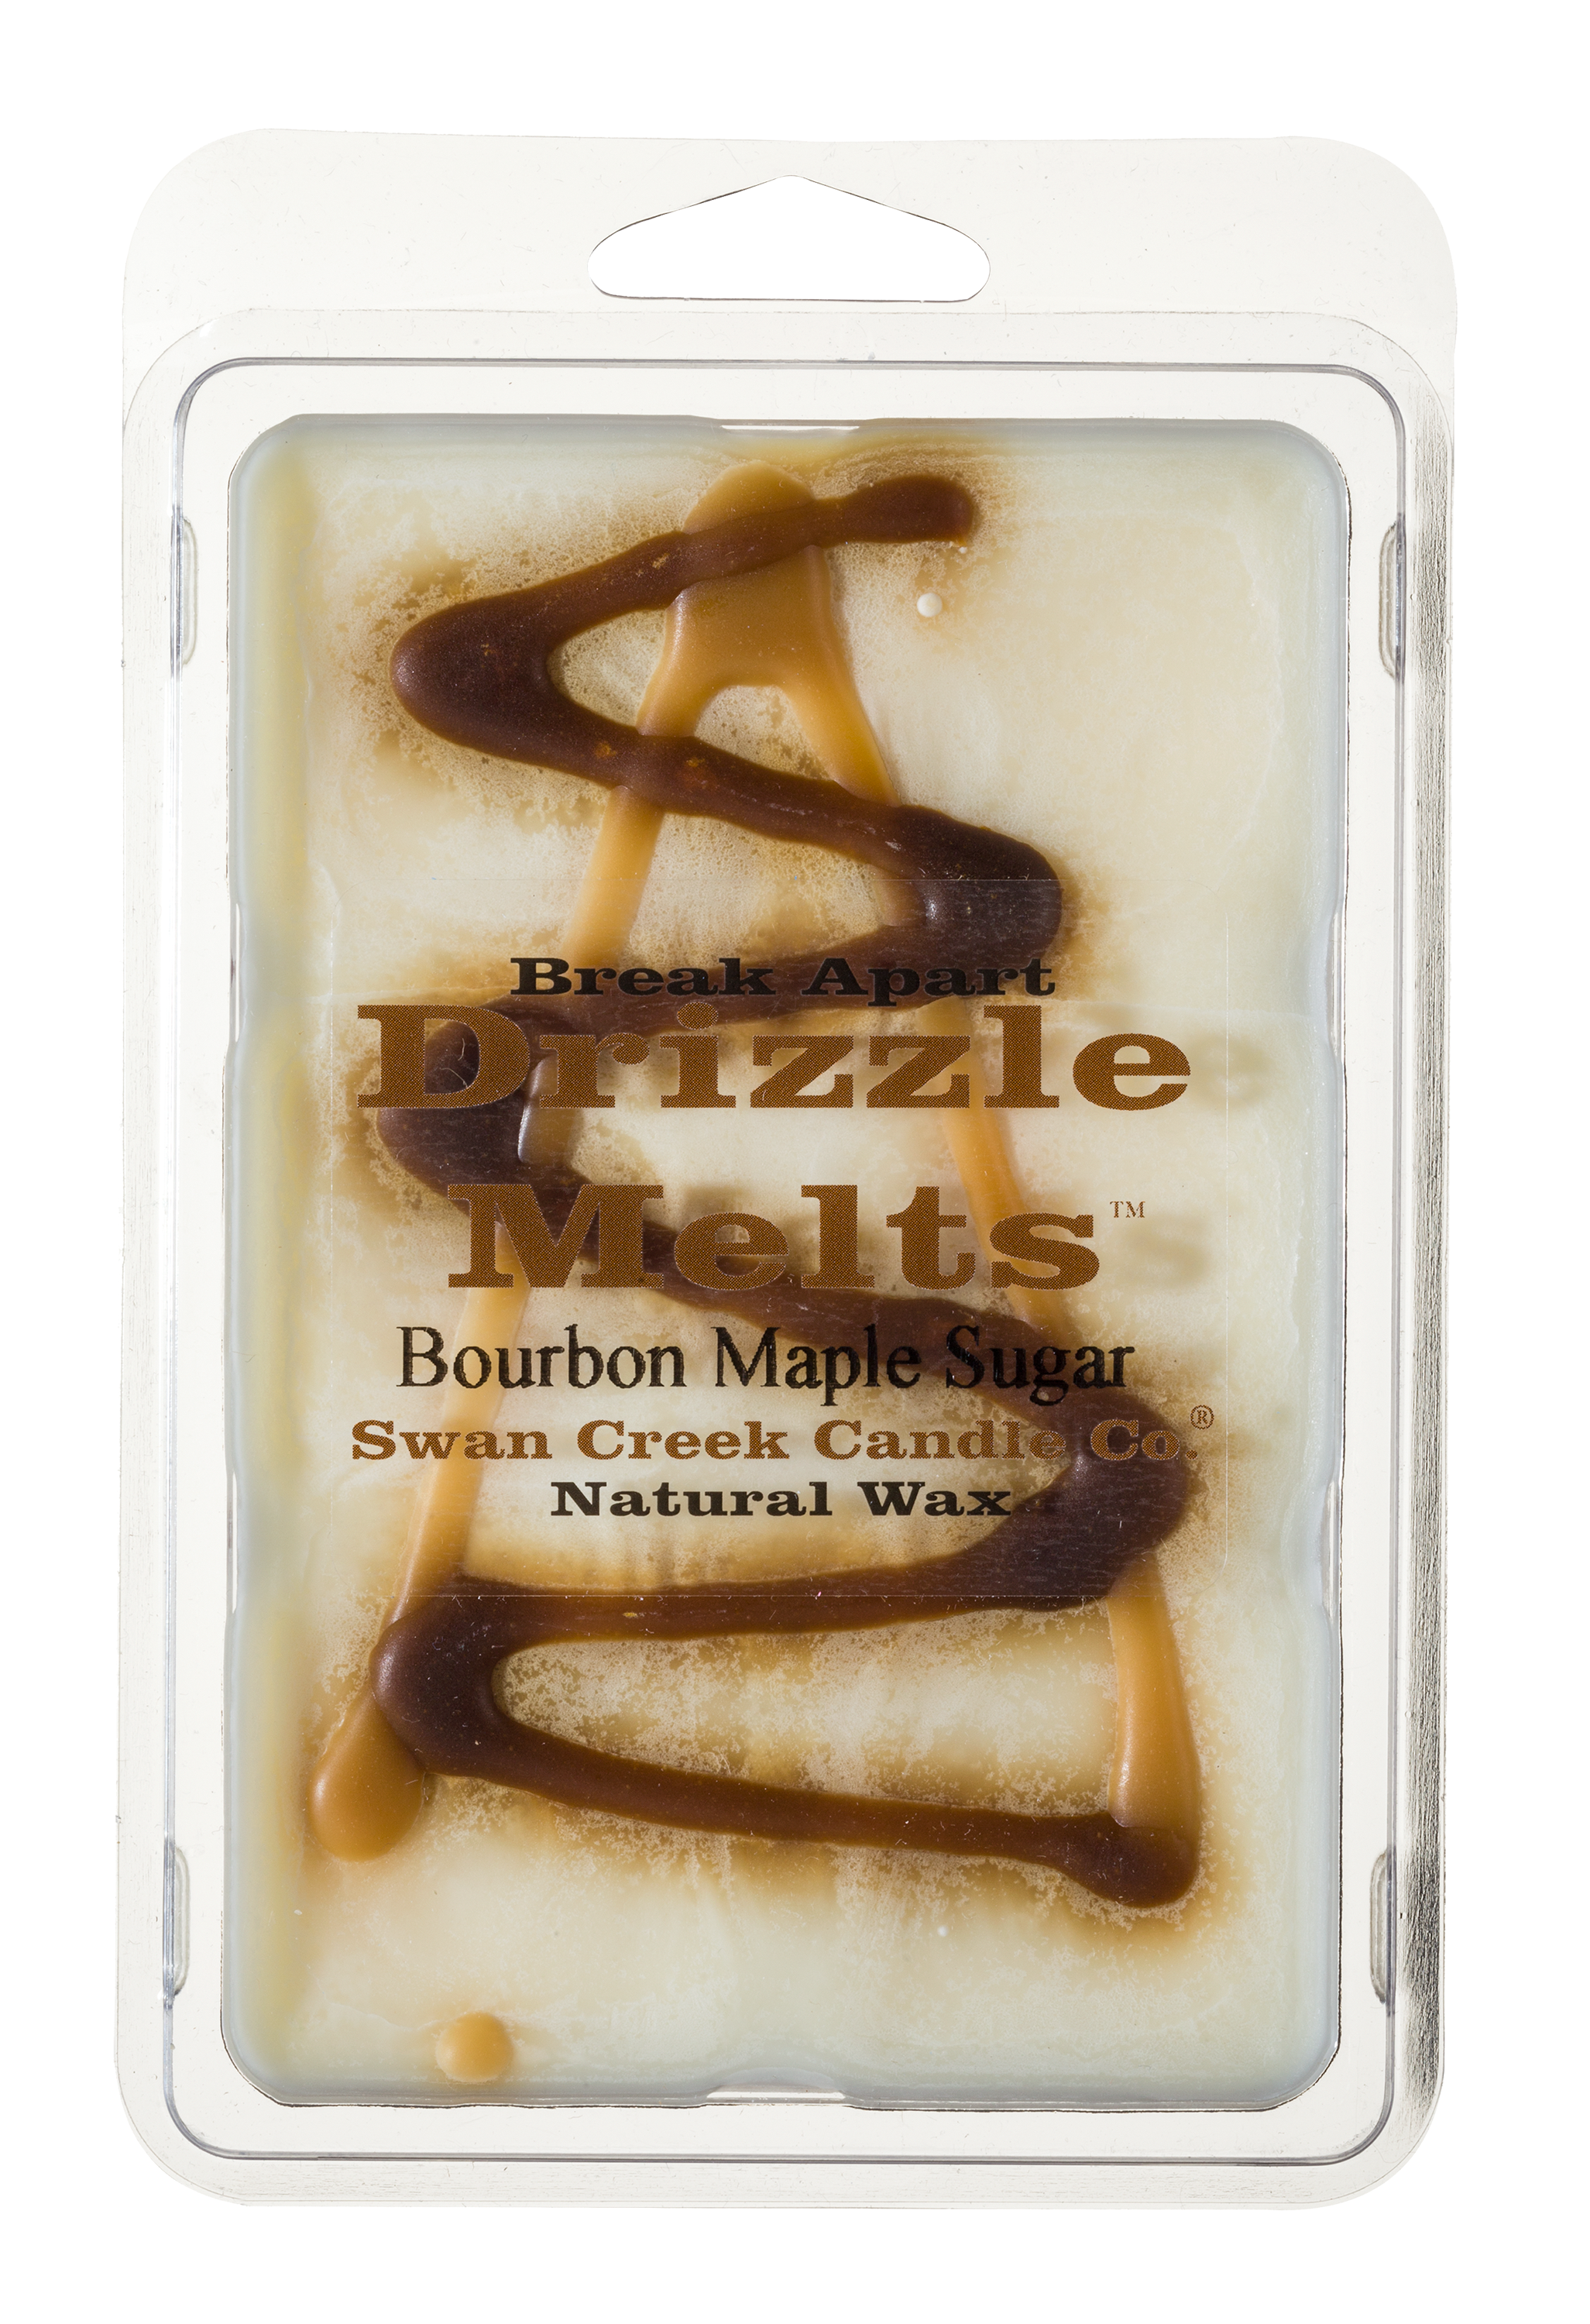 Swan Creek Candle Company Drizzle Melts Scented Melting Wax - Bourbon Maple Sugar